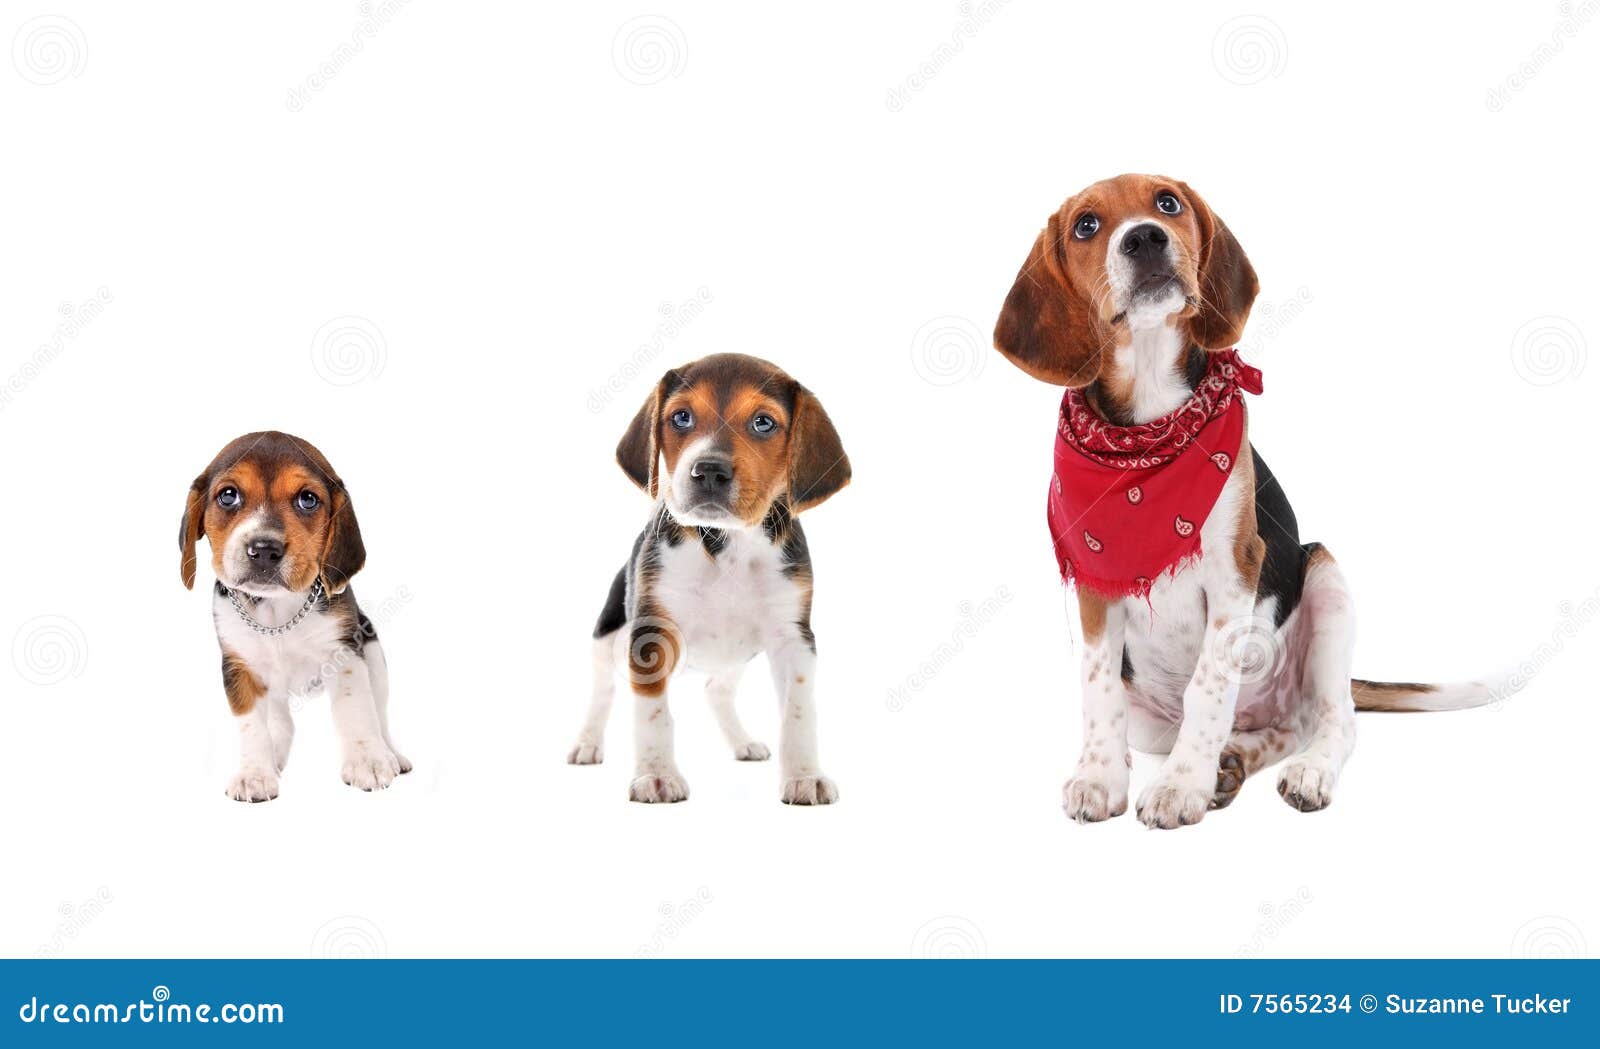 Beagle puppy growth stages stock photo. Image of pedigree